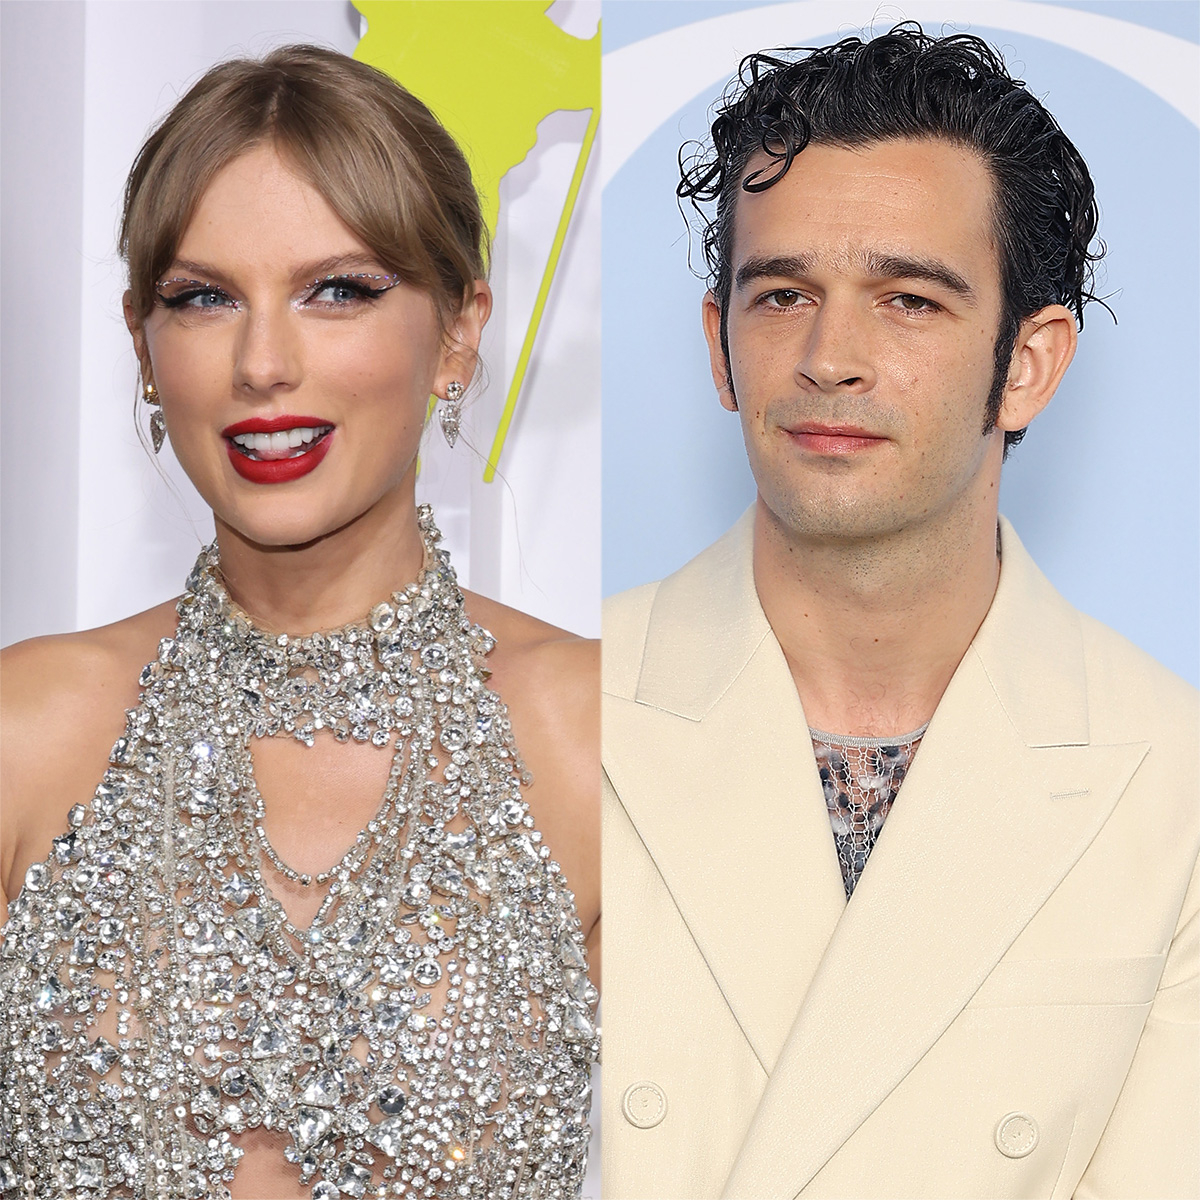 Taylor Swift and Matty Healy Break Up After Whirlwind Romance